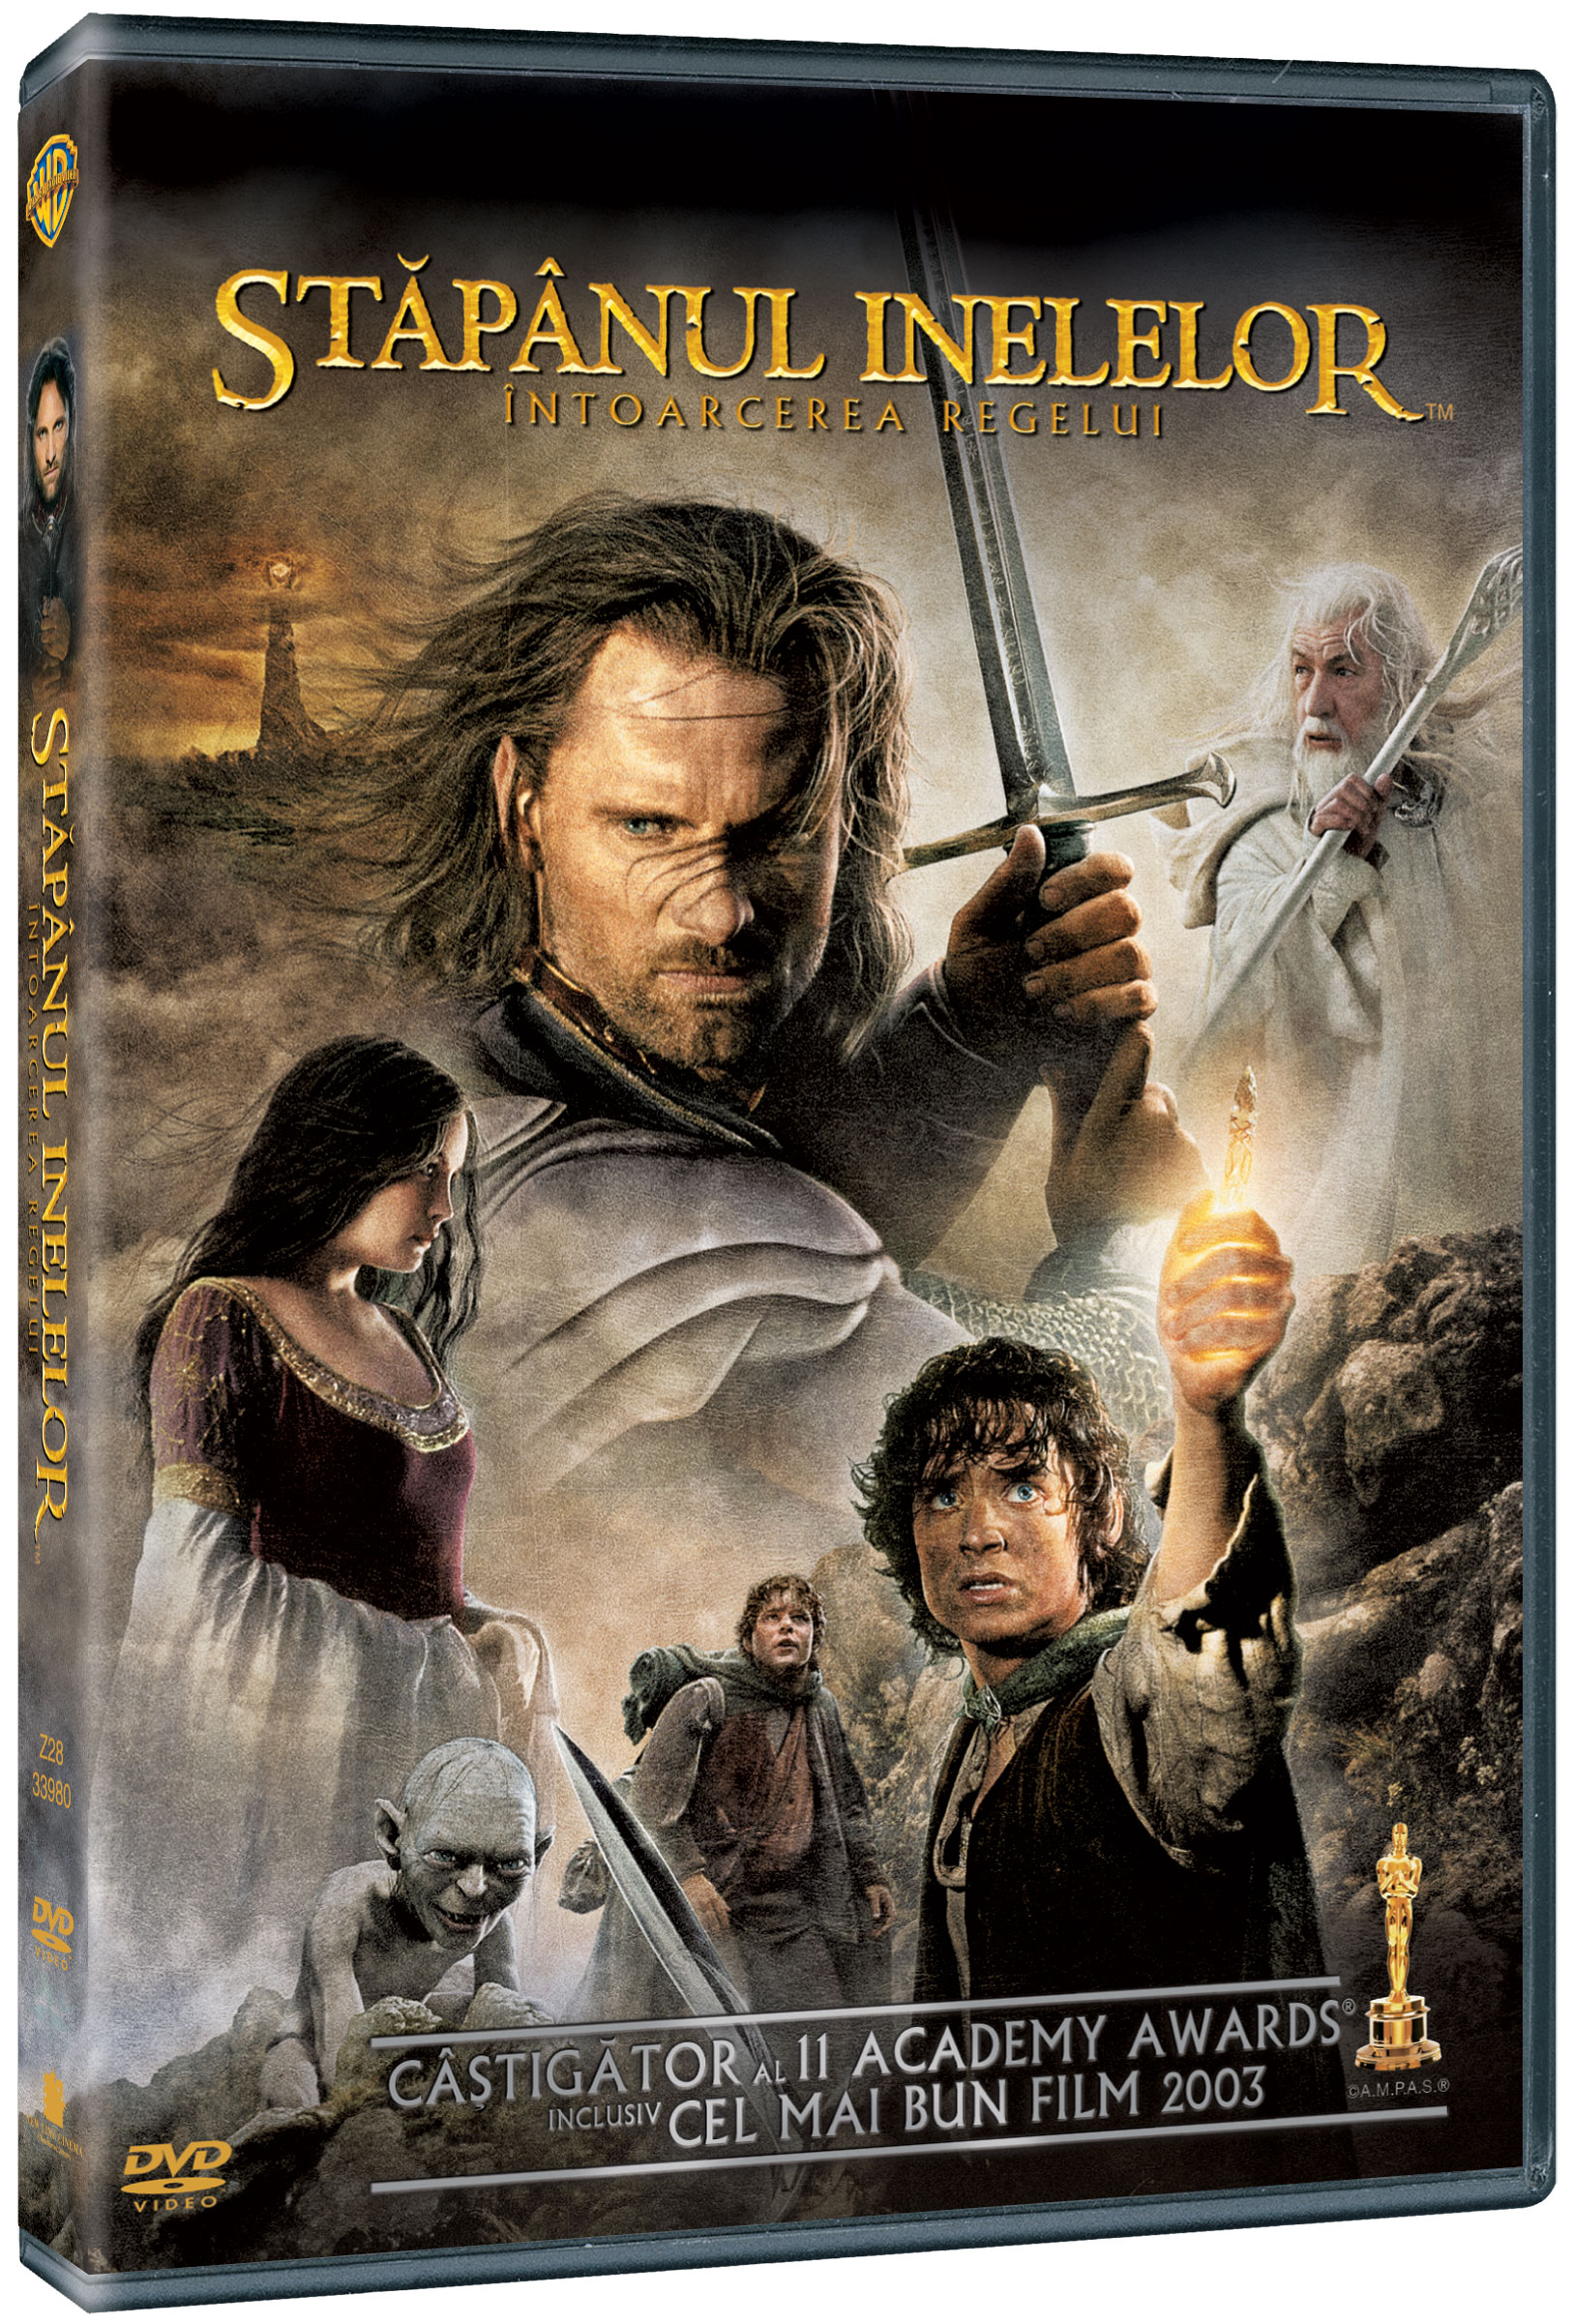 Stapanul Inelelor - Intoarcerea Regelui / The Lord of the Rings - The Return of the King | Peter Jackson